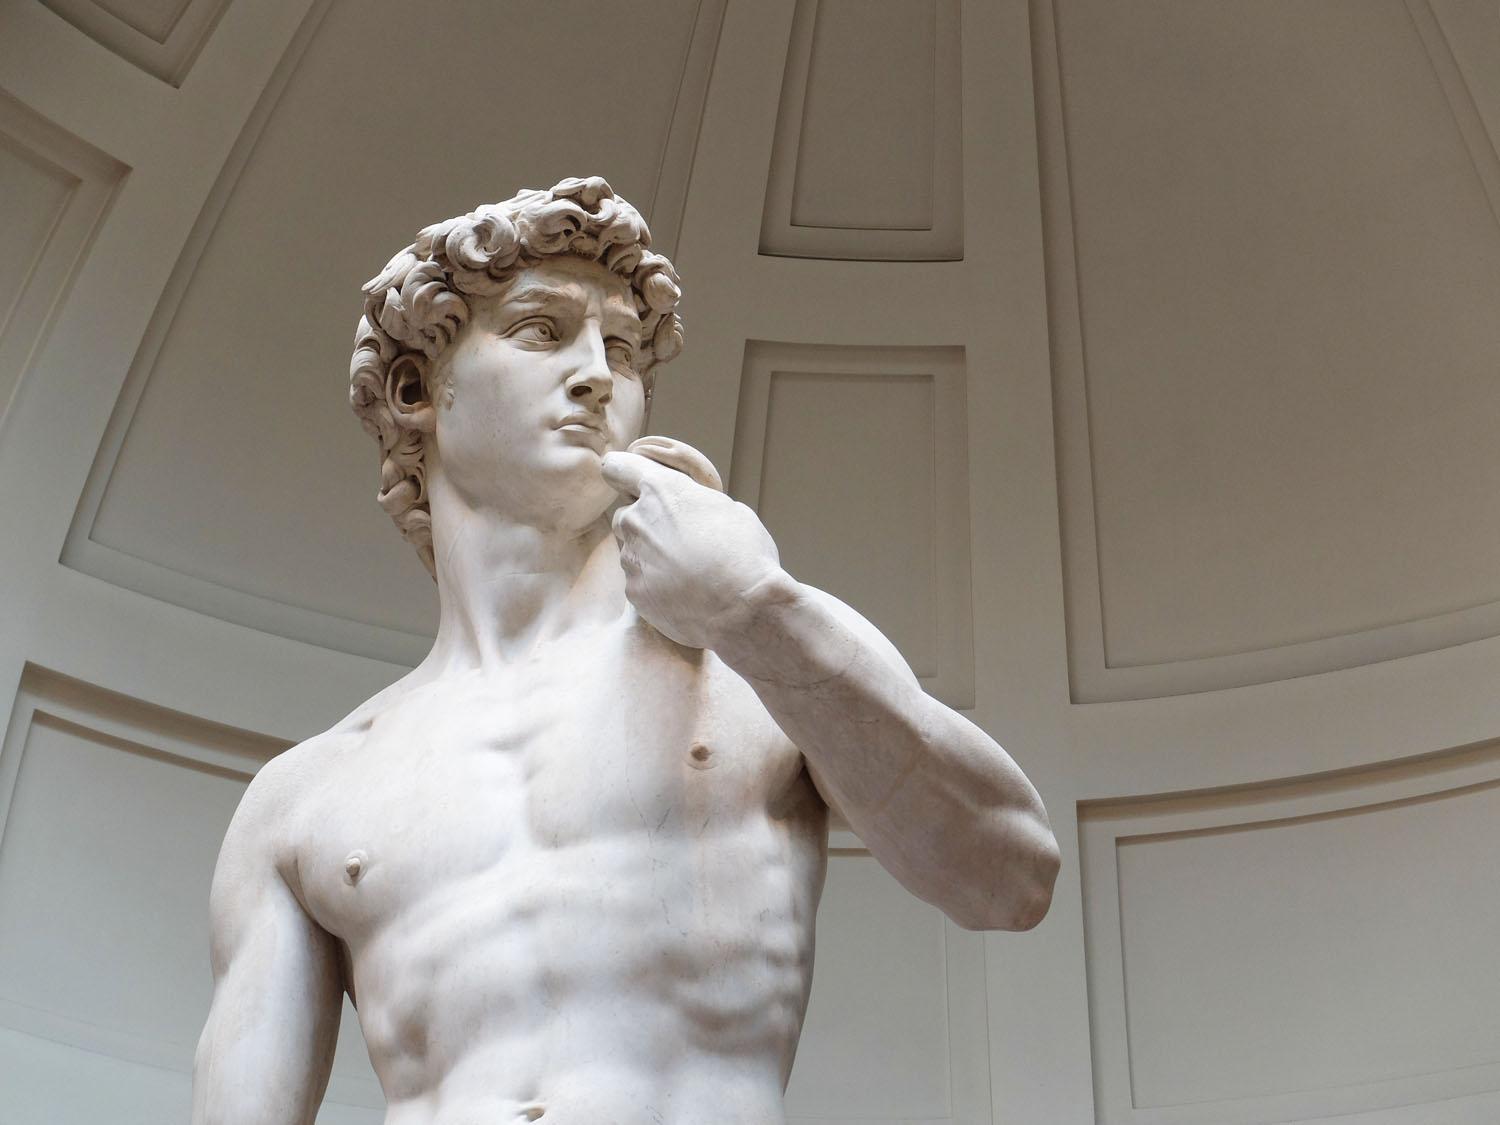 🗽 Can You Match These Famous Statues to Their Locations? David of Michelangelo Sculpture